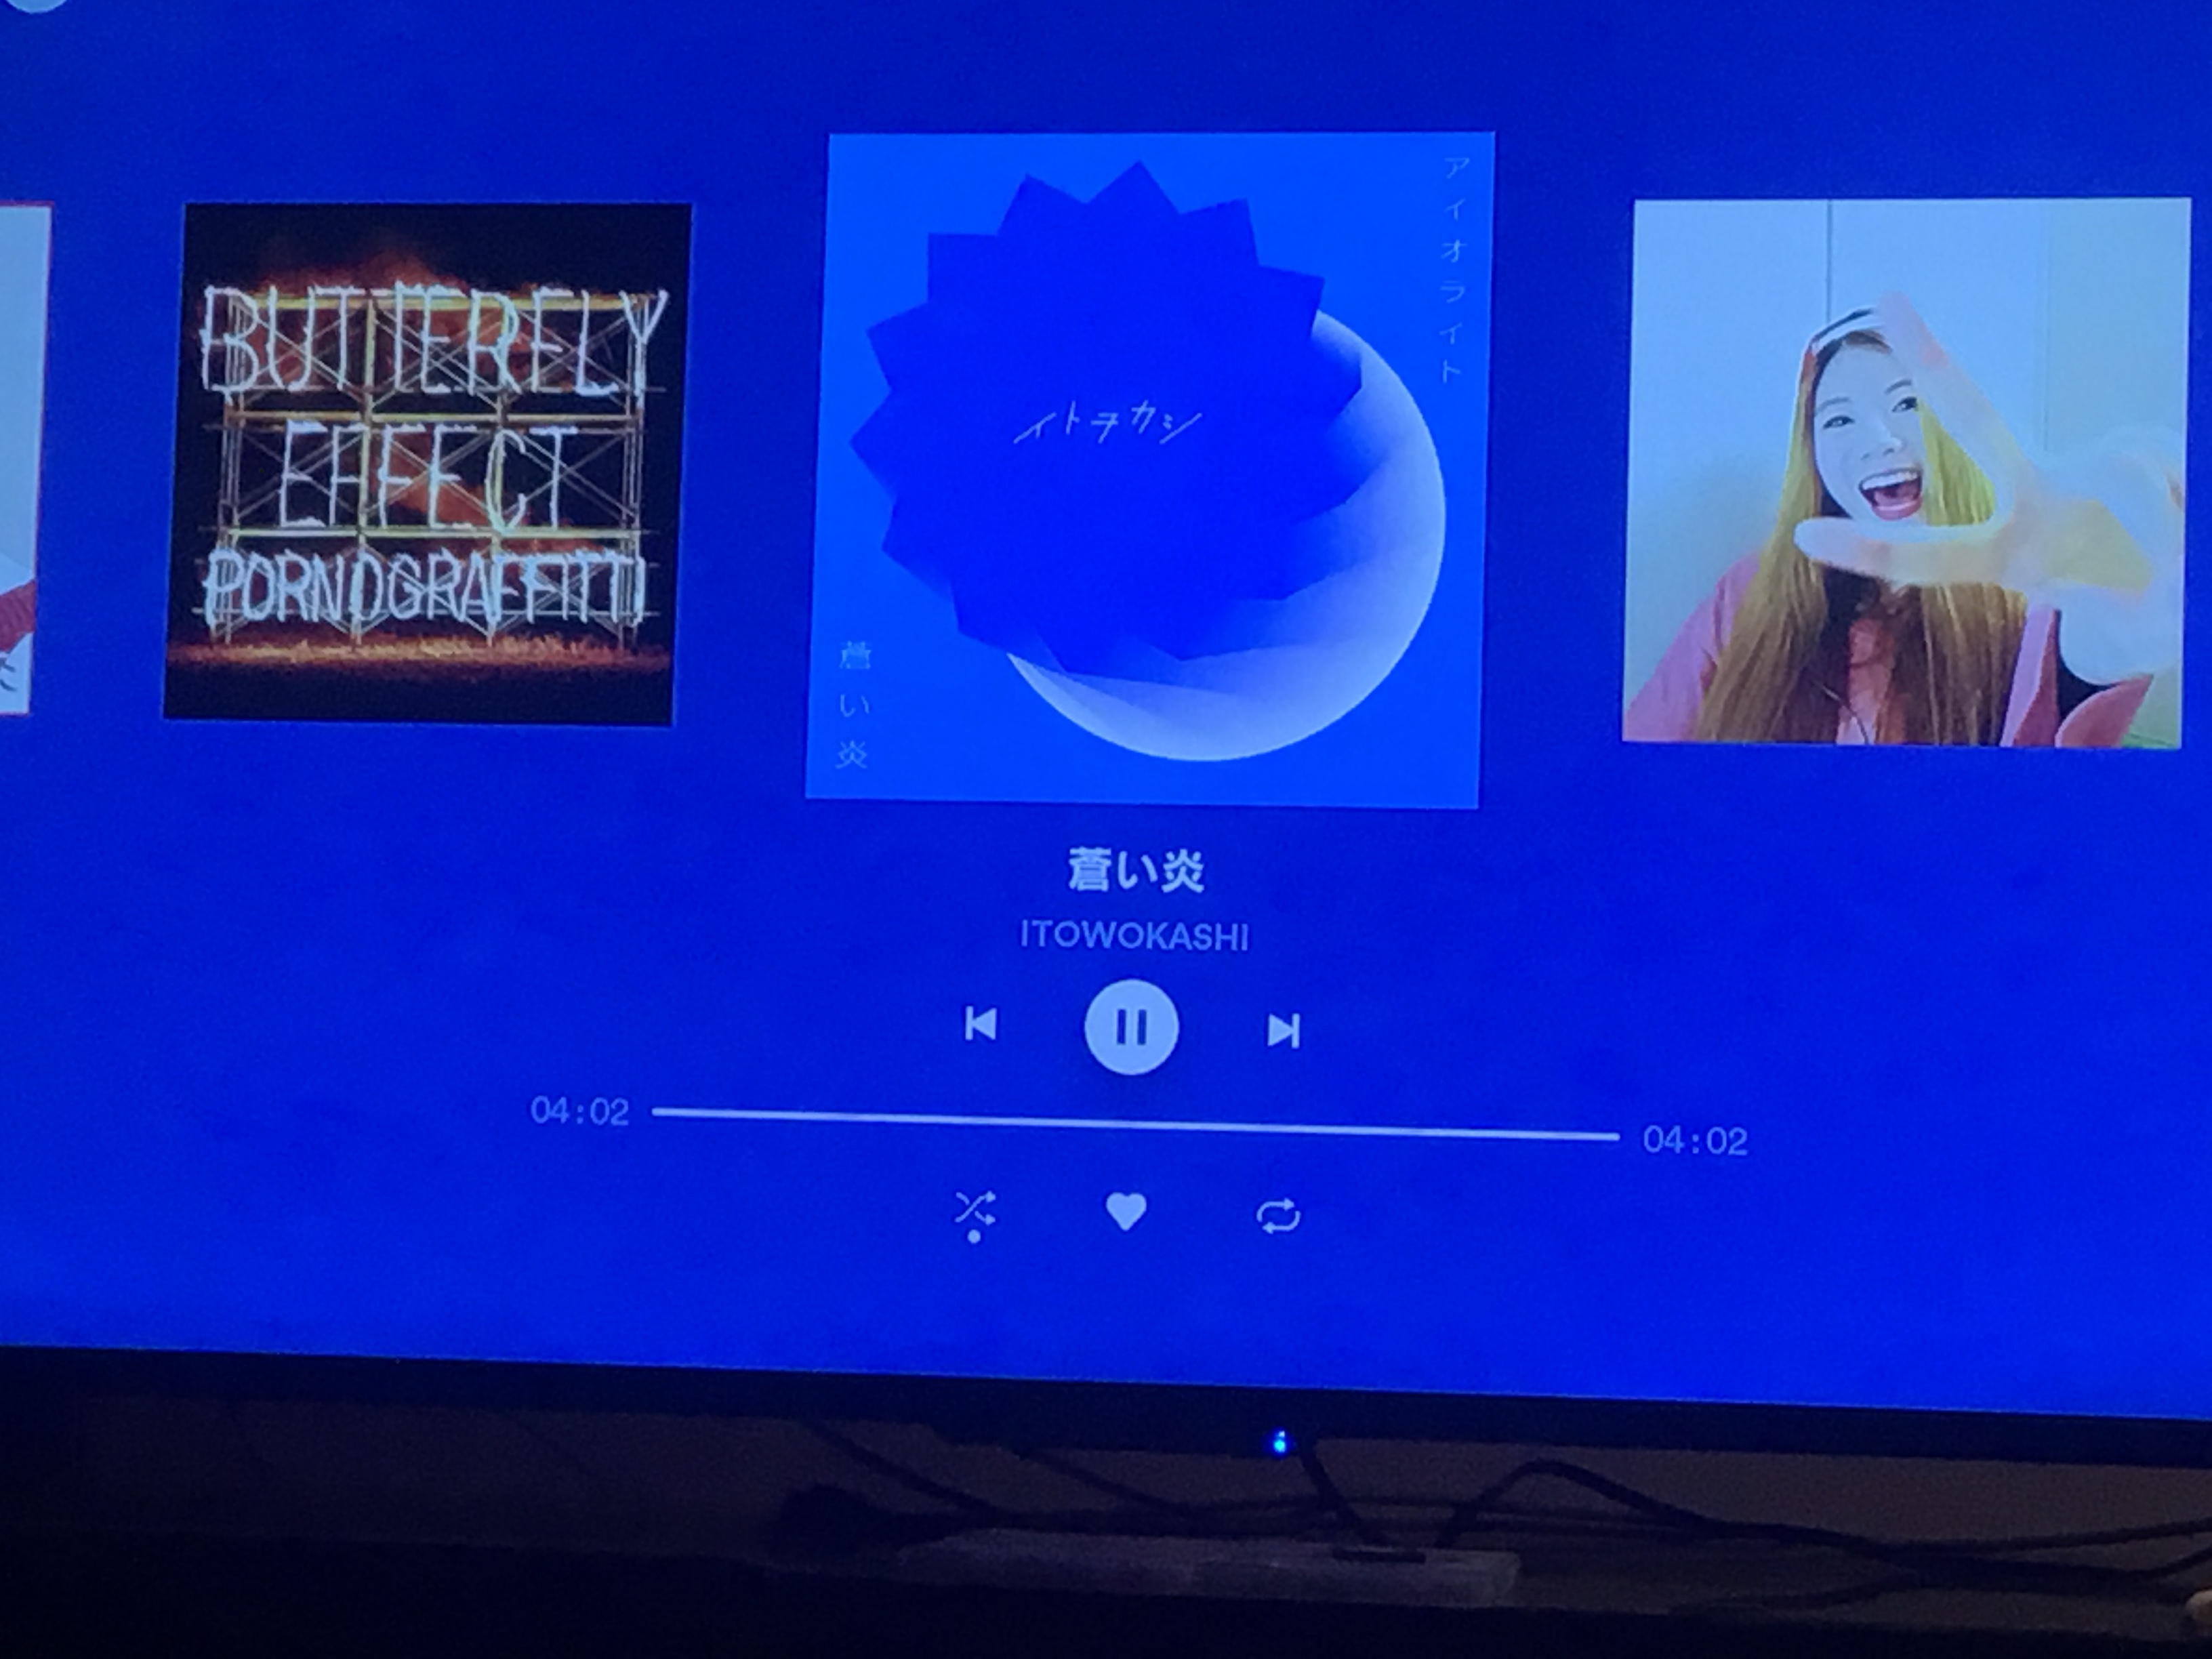 PS4] Playback suddenly stops - Page 2 - The Spotify Community